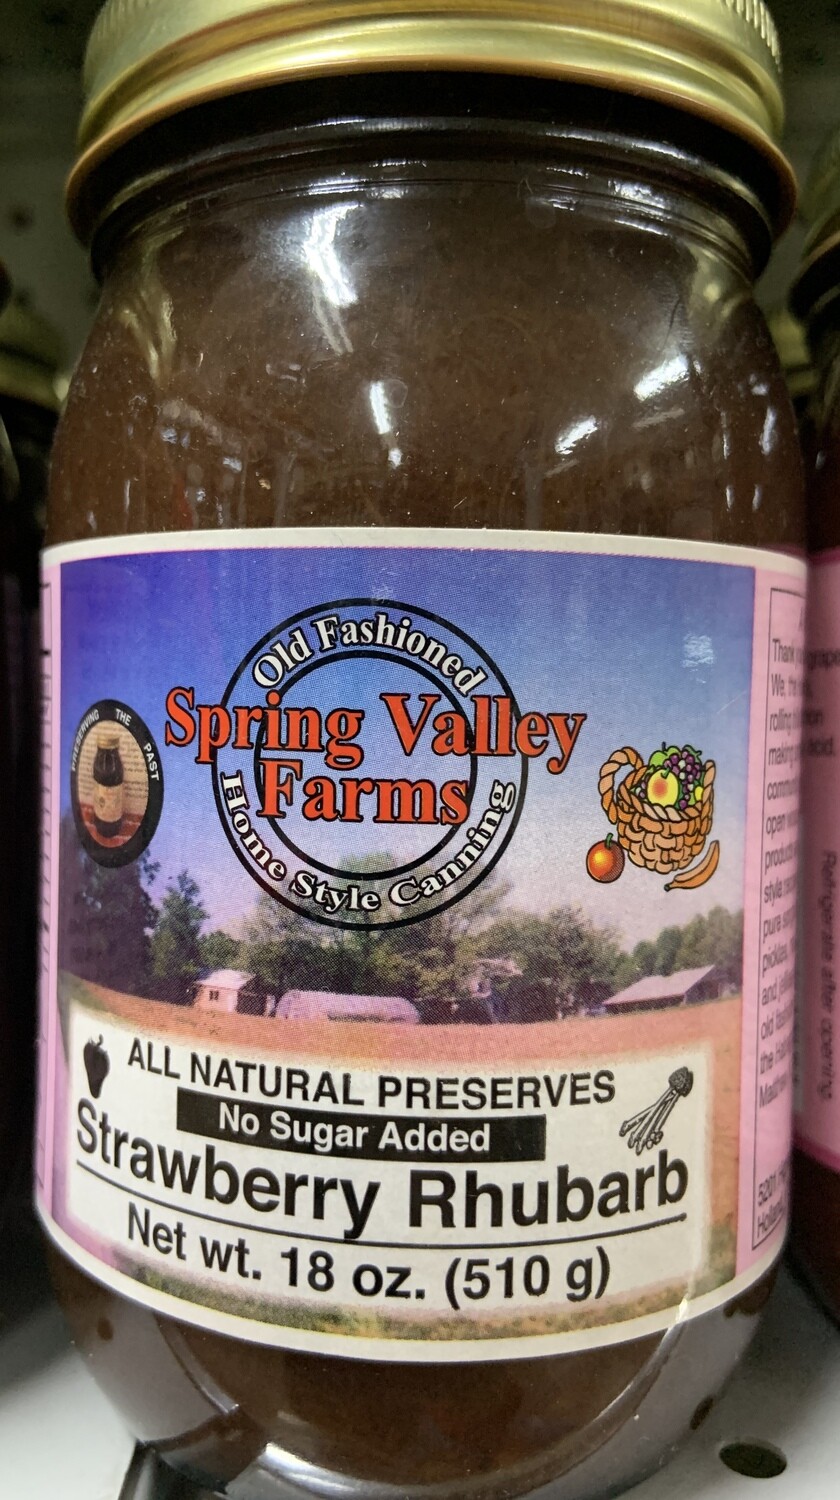 Spring Valley Farms No Sugar Added Fruit Juice Sweetened Strawberry Rhubarb Preserves19oz